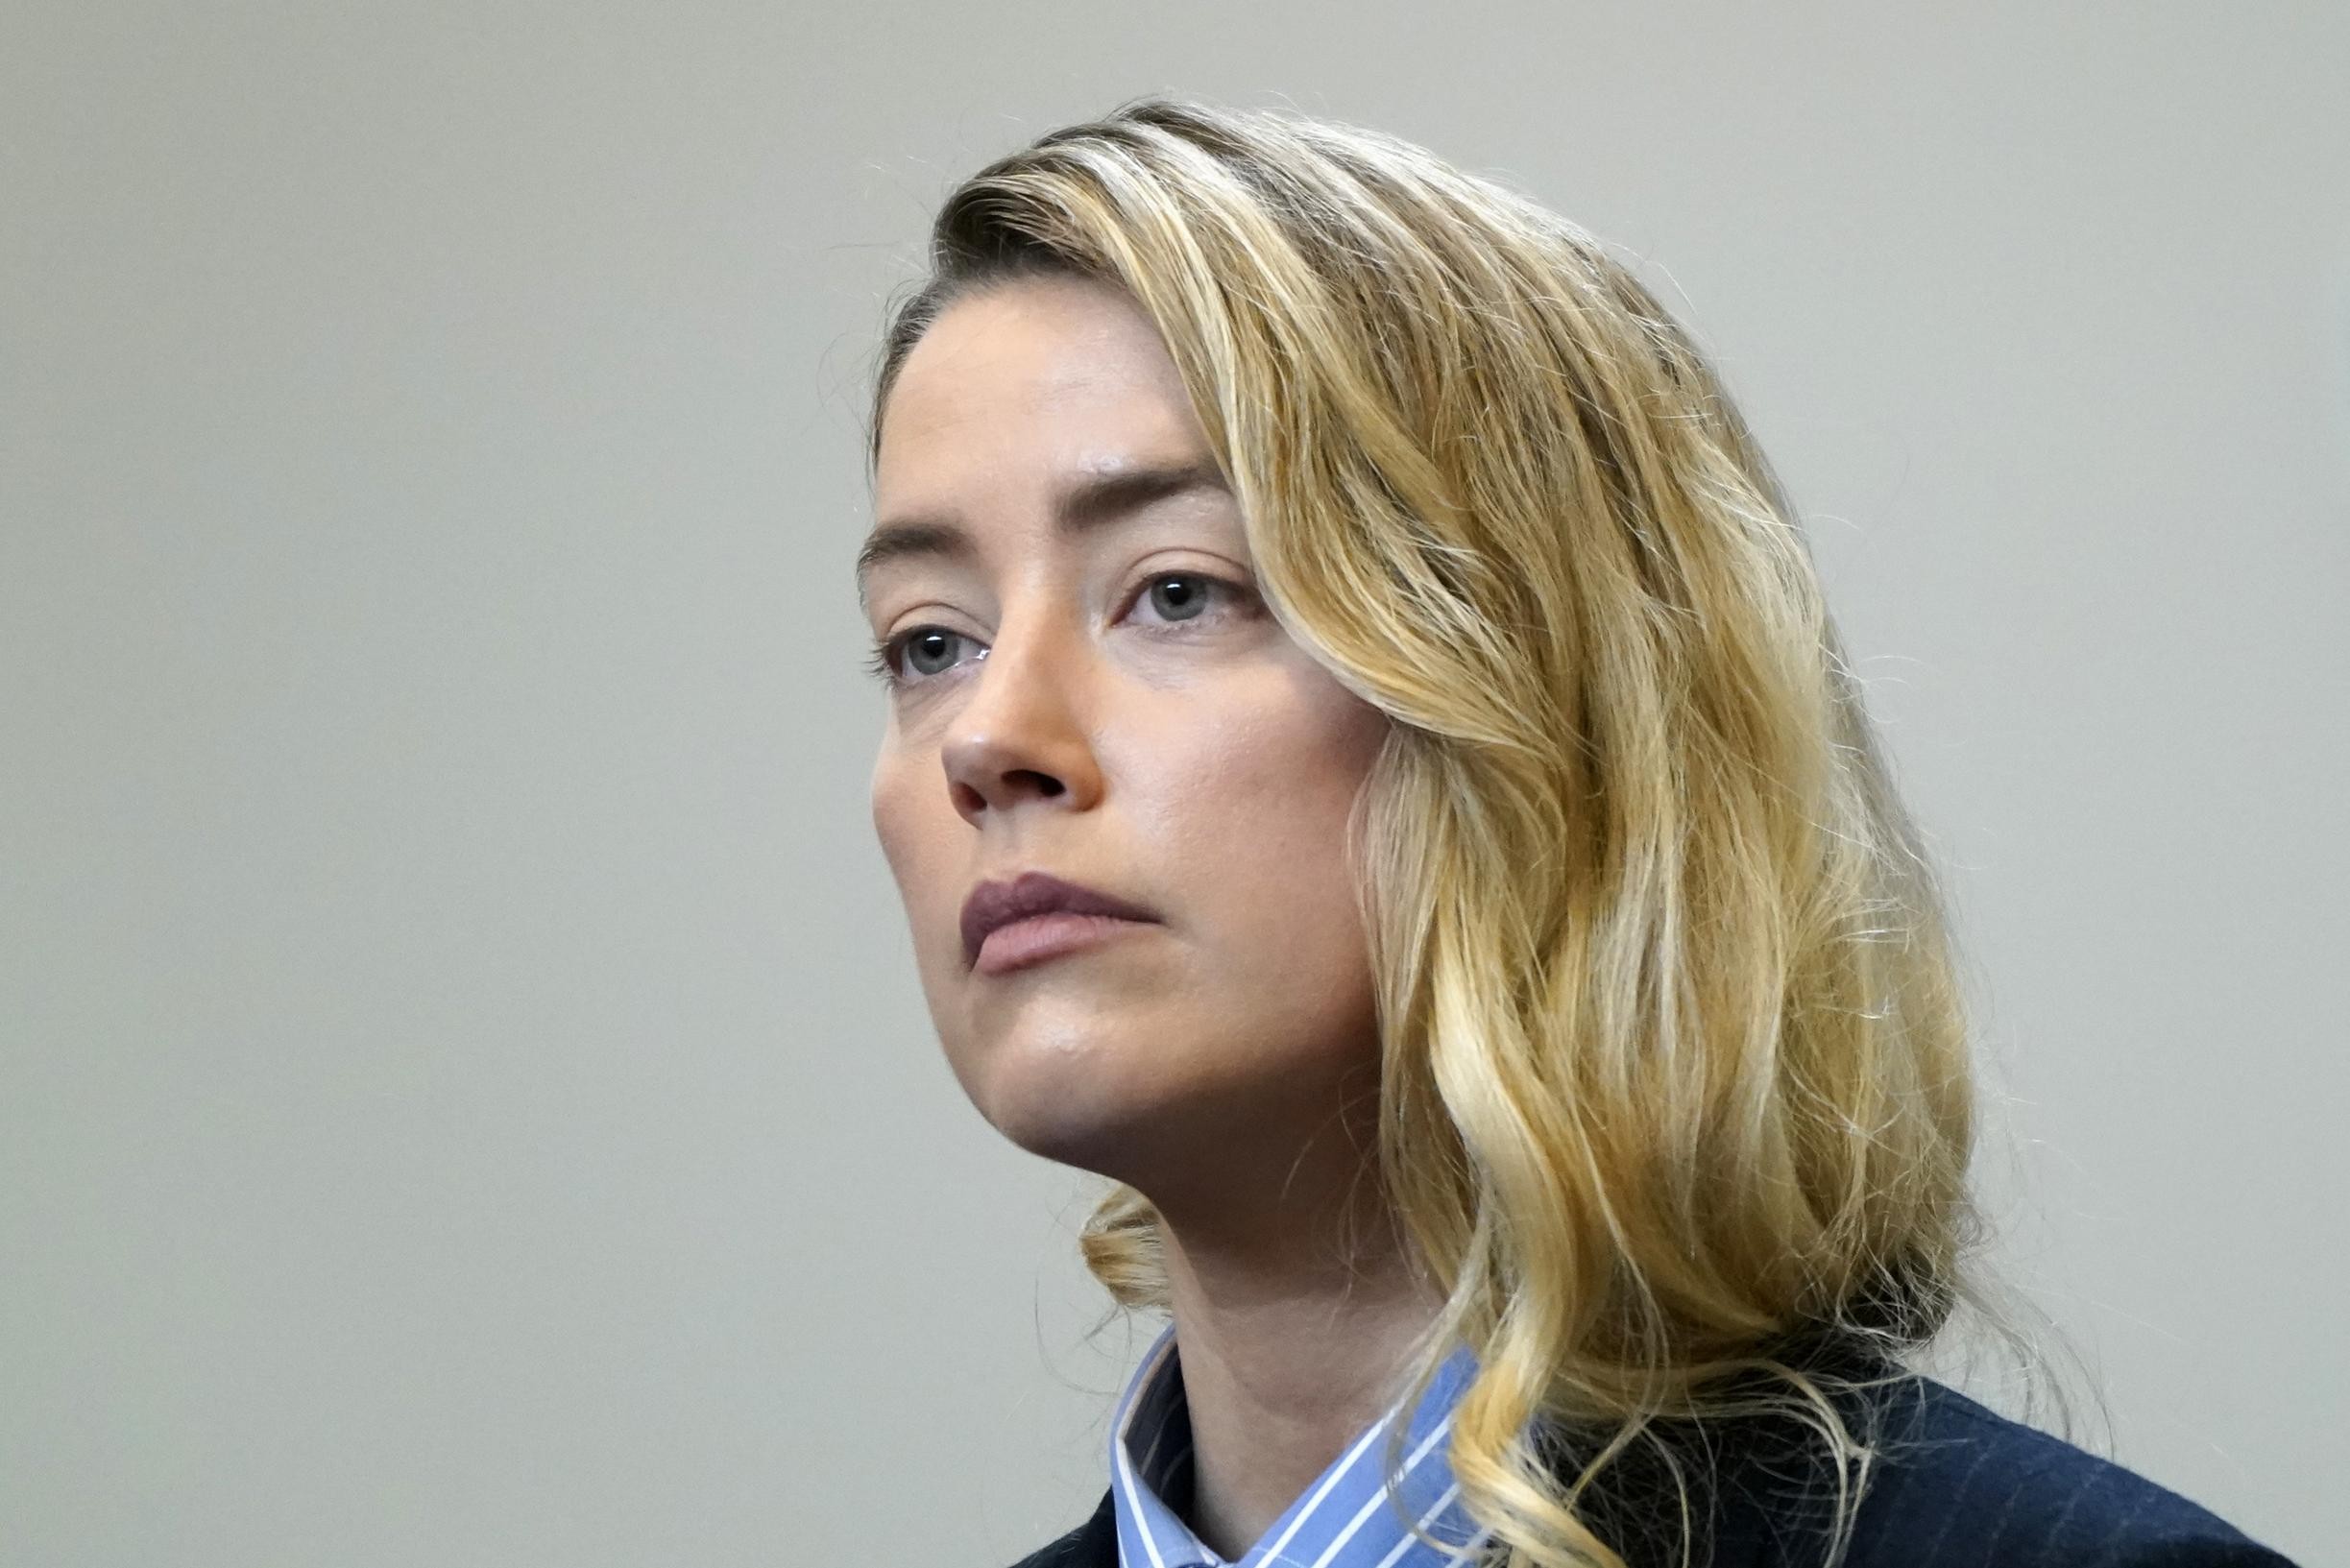 Amber Heard speaks for the first time during the trial of ex Johnny Depp